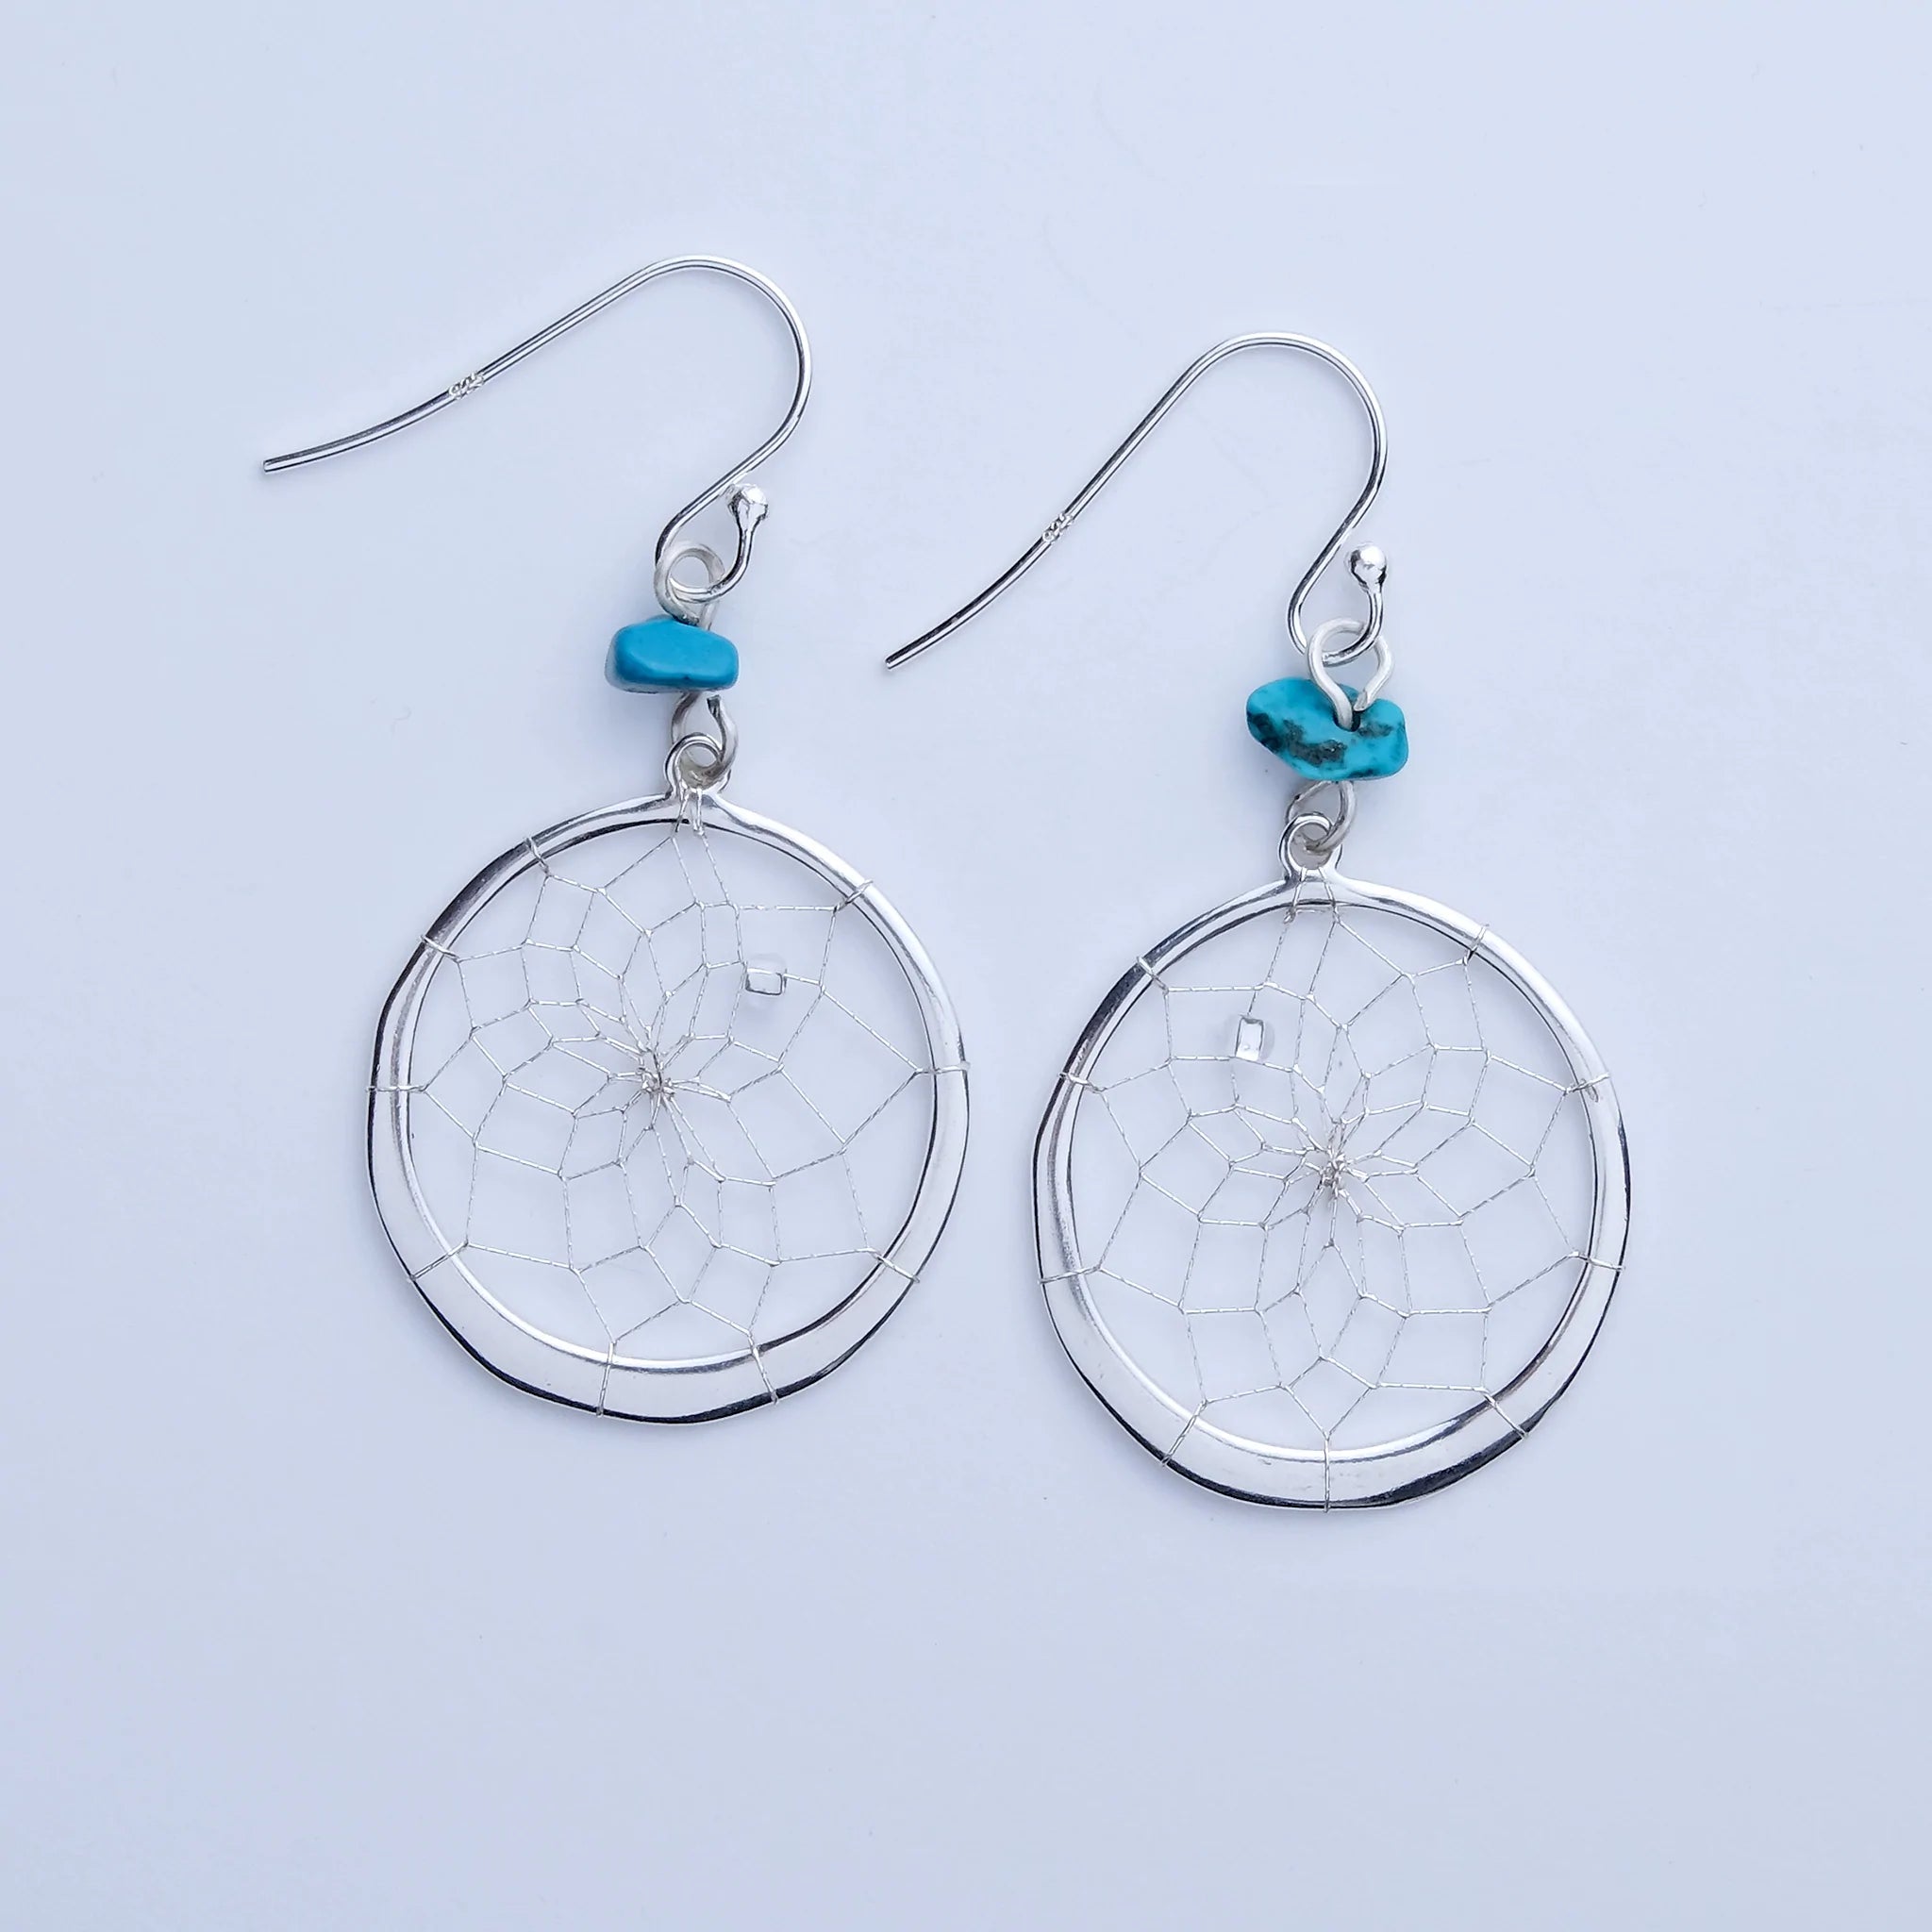 Silver Dreamcatcher Earrings with Turquoise Stone